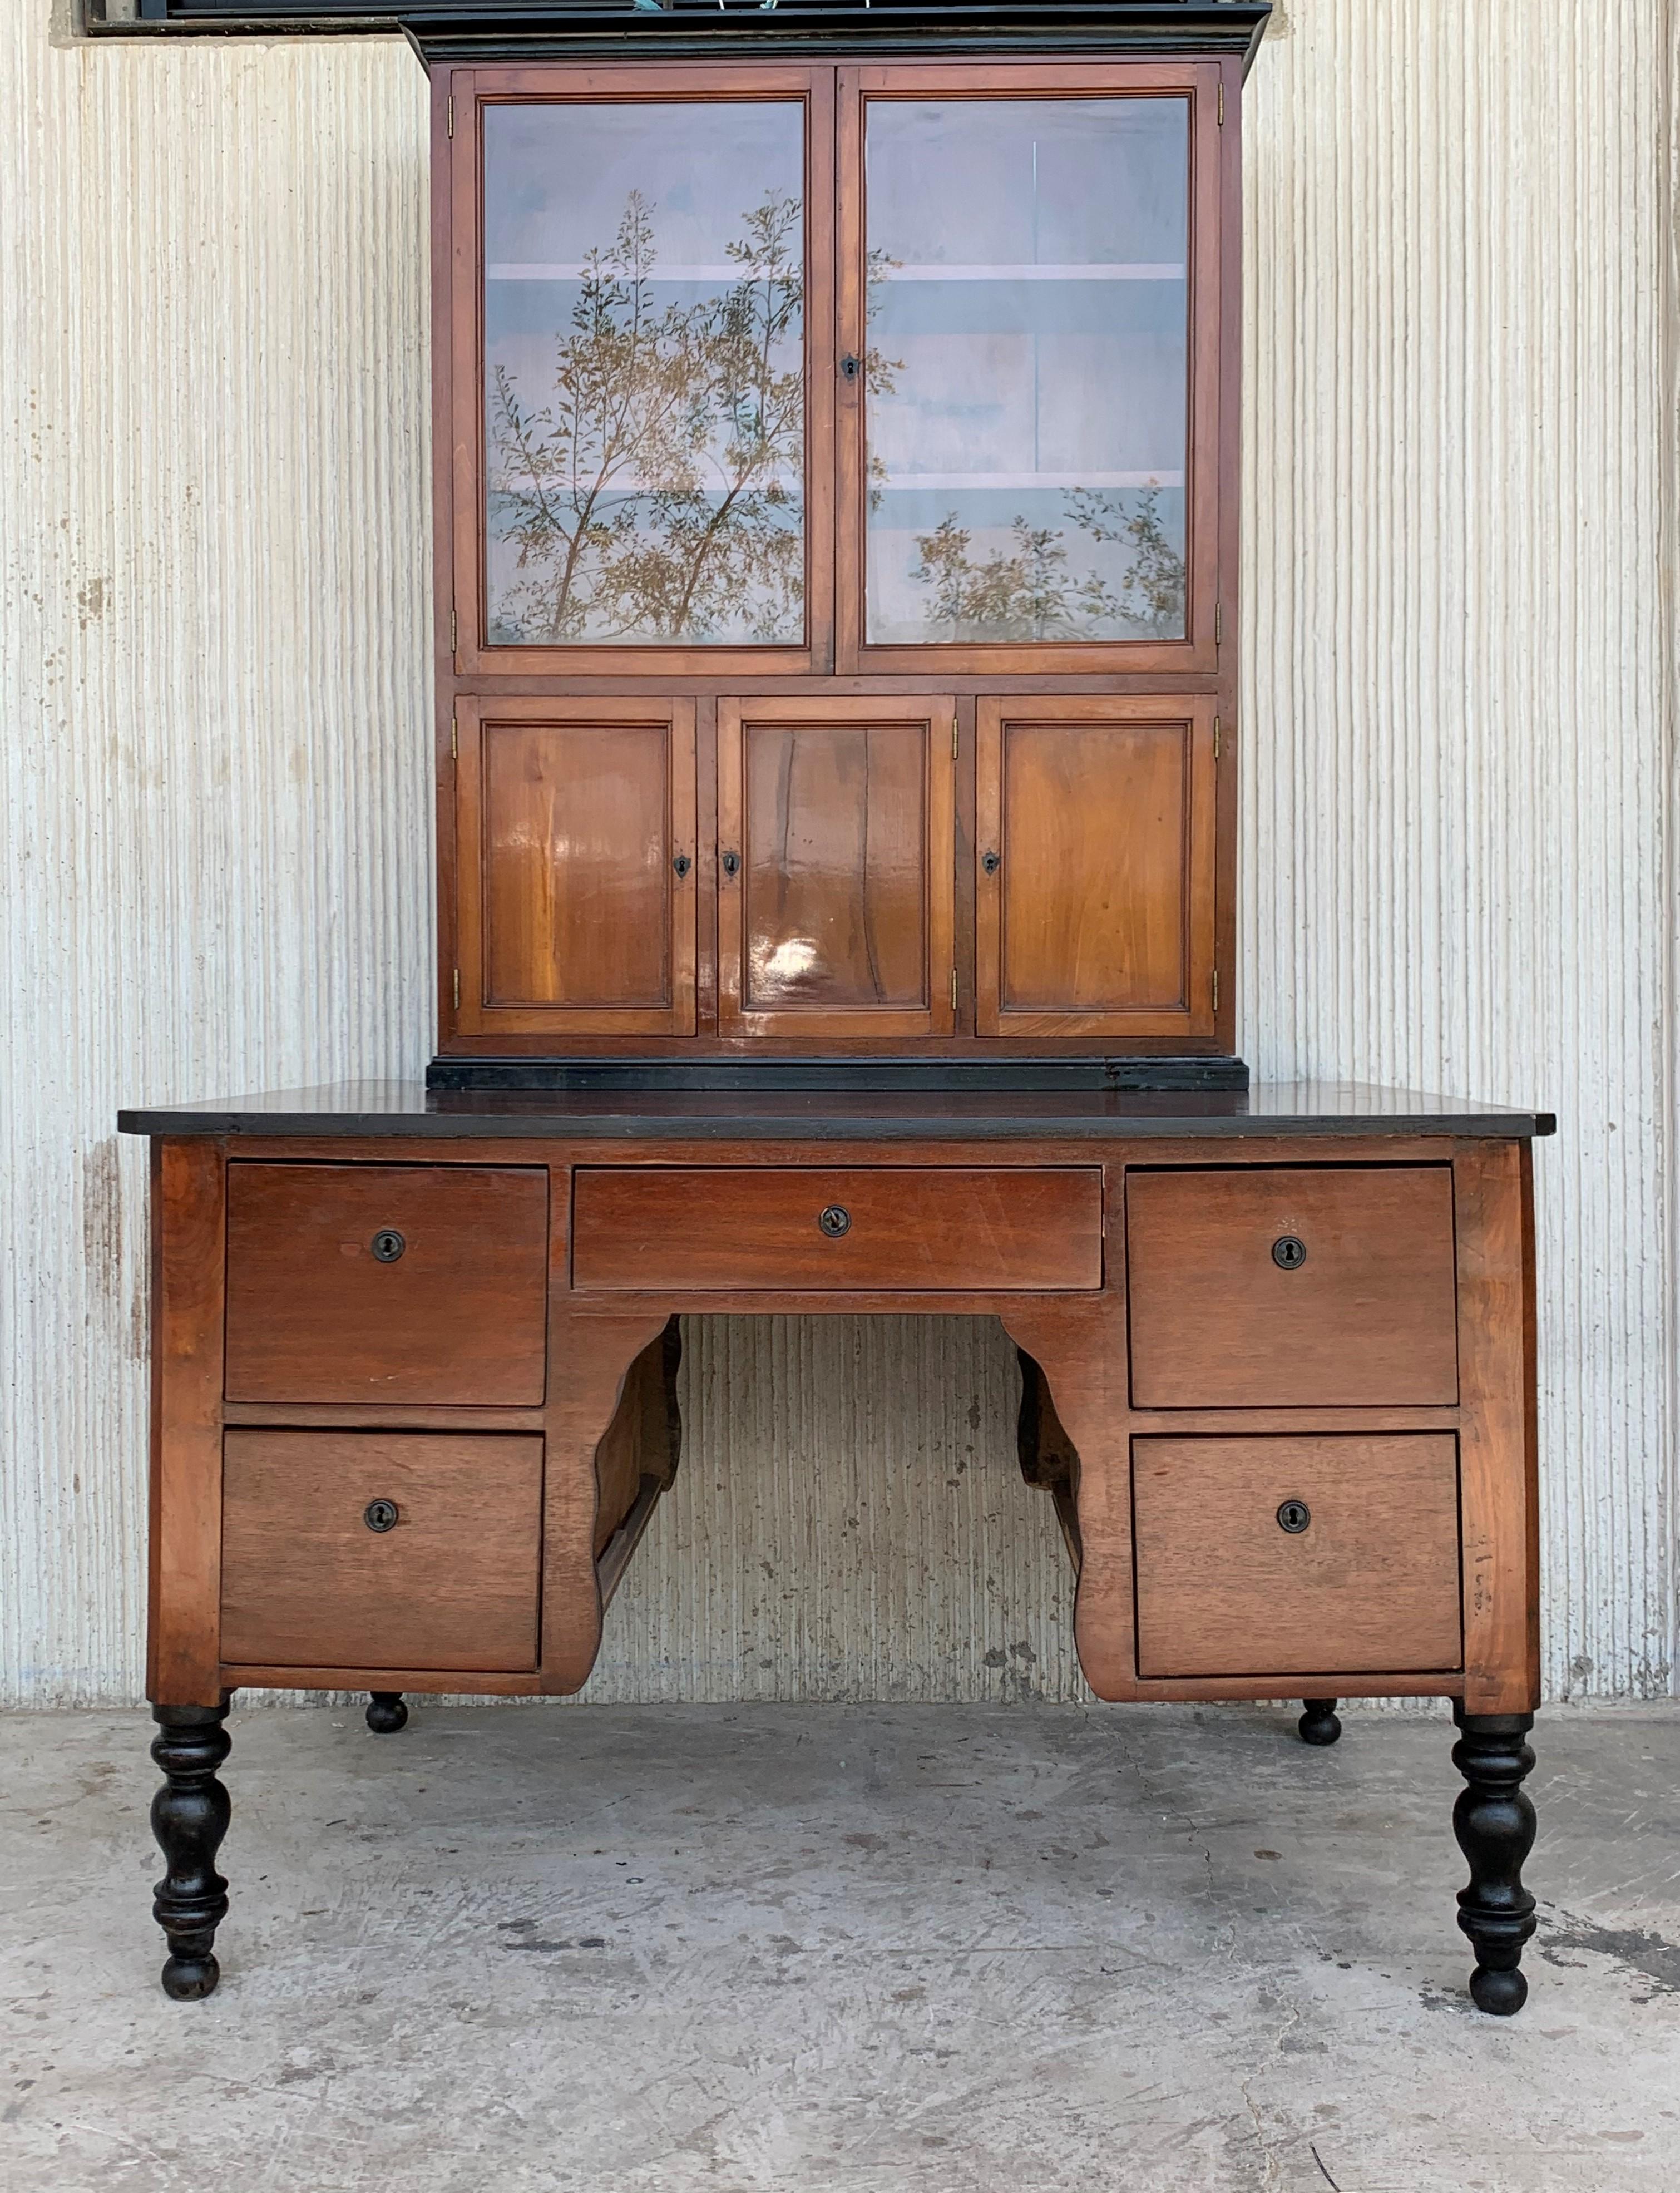 This early (circa 1830) French Provincial plantation style walnut secretary desk and bookcase features an upper part topped by a cornice above two glazed doors opening up to a shelved interior great for either books or display. An open center